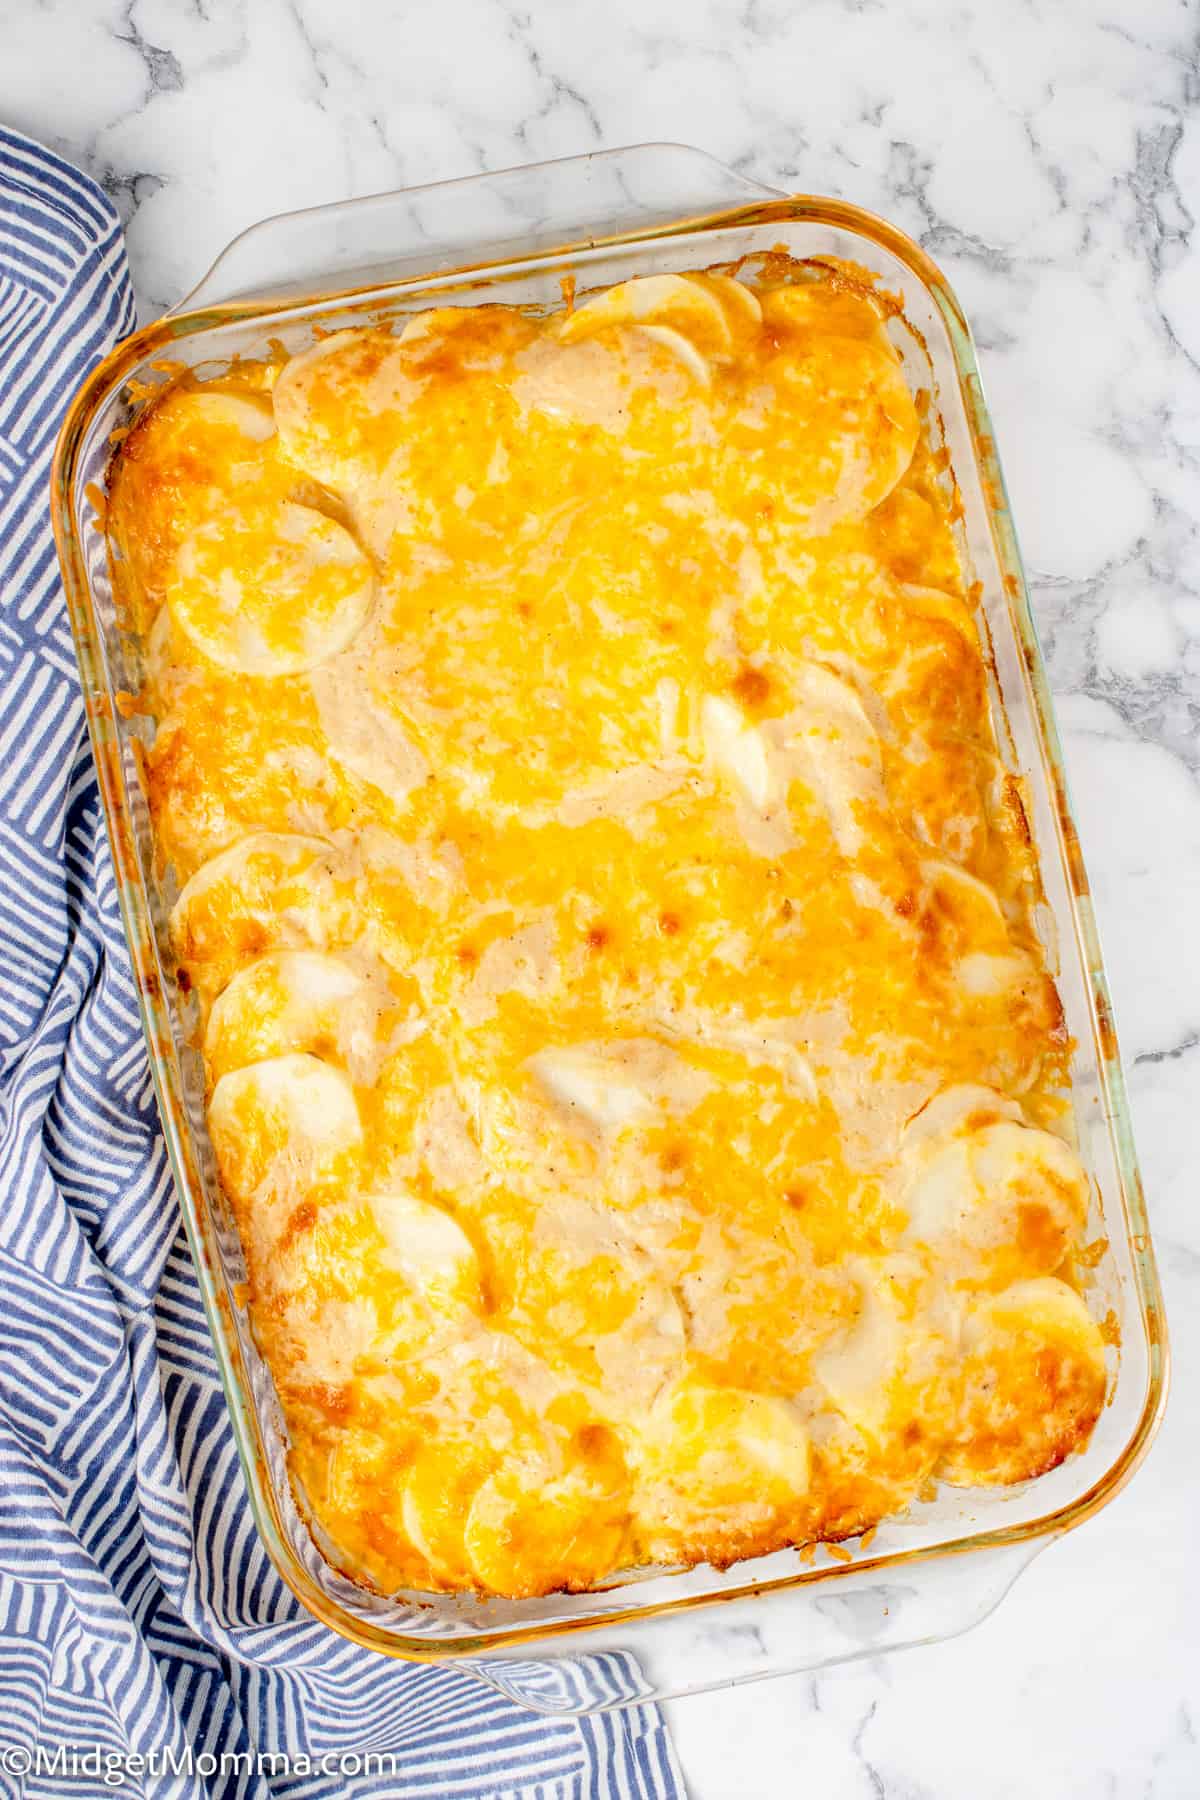 oerhead photo of Creamy Scalloped Potatoes with Cheese in a casserole dish